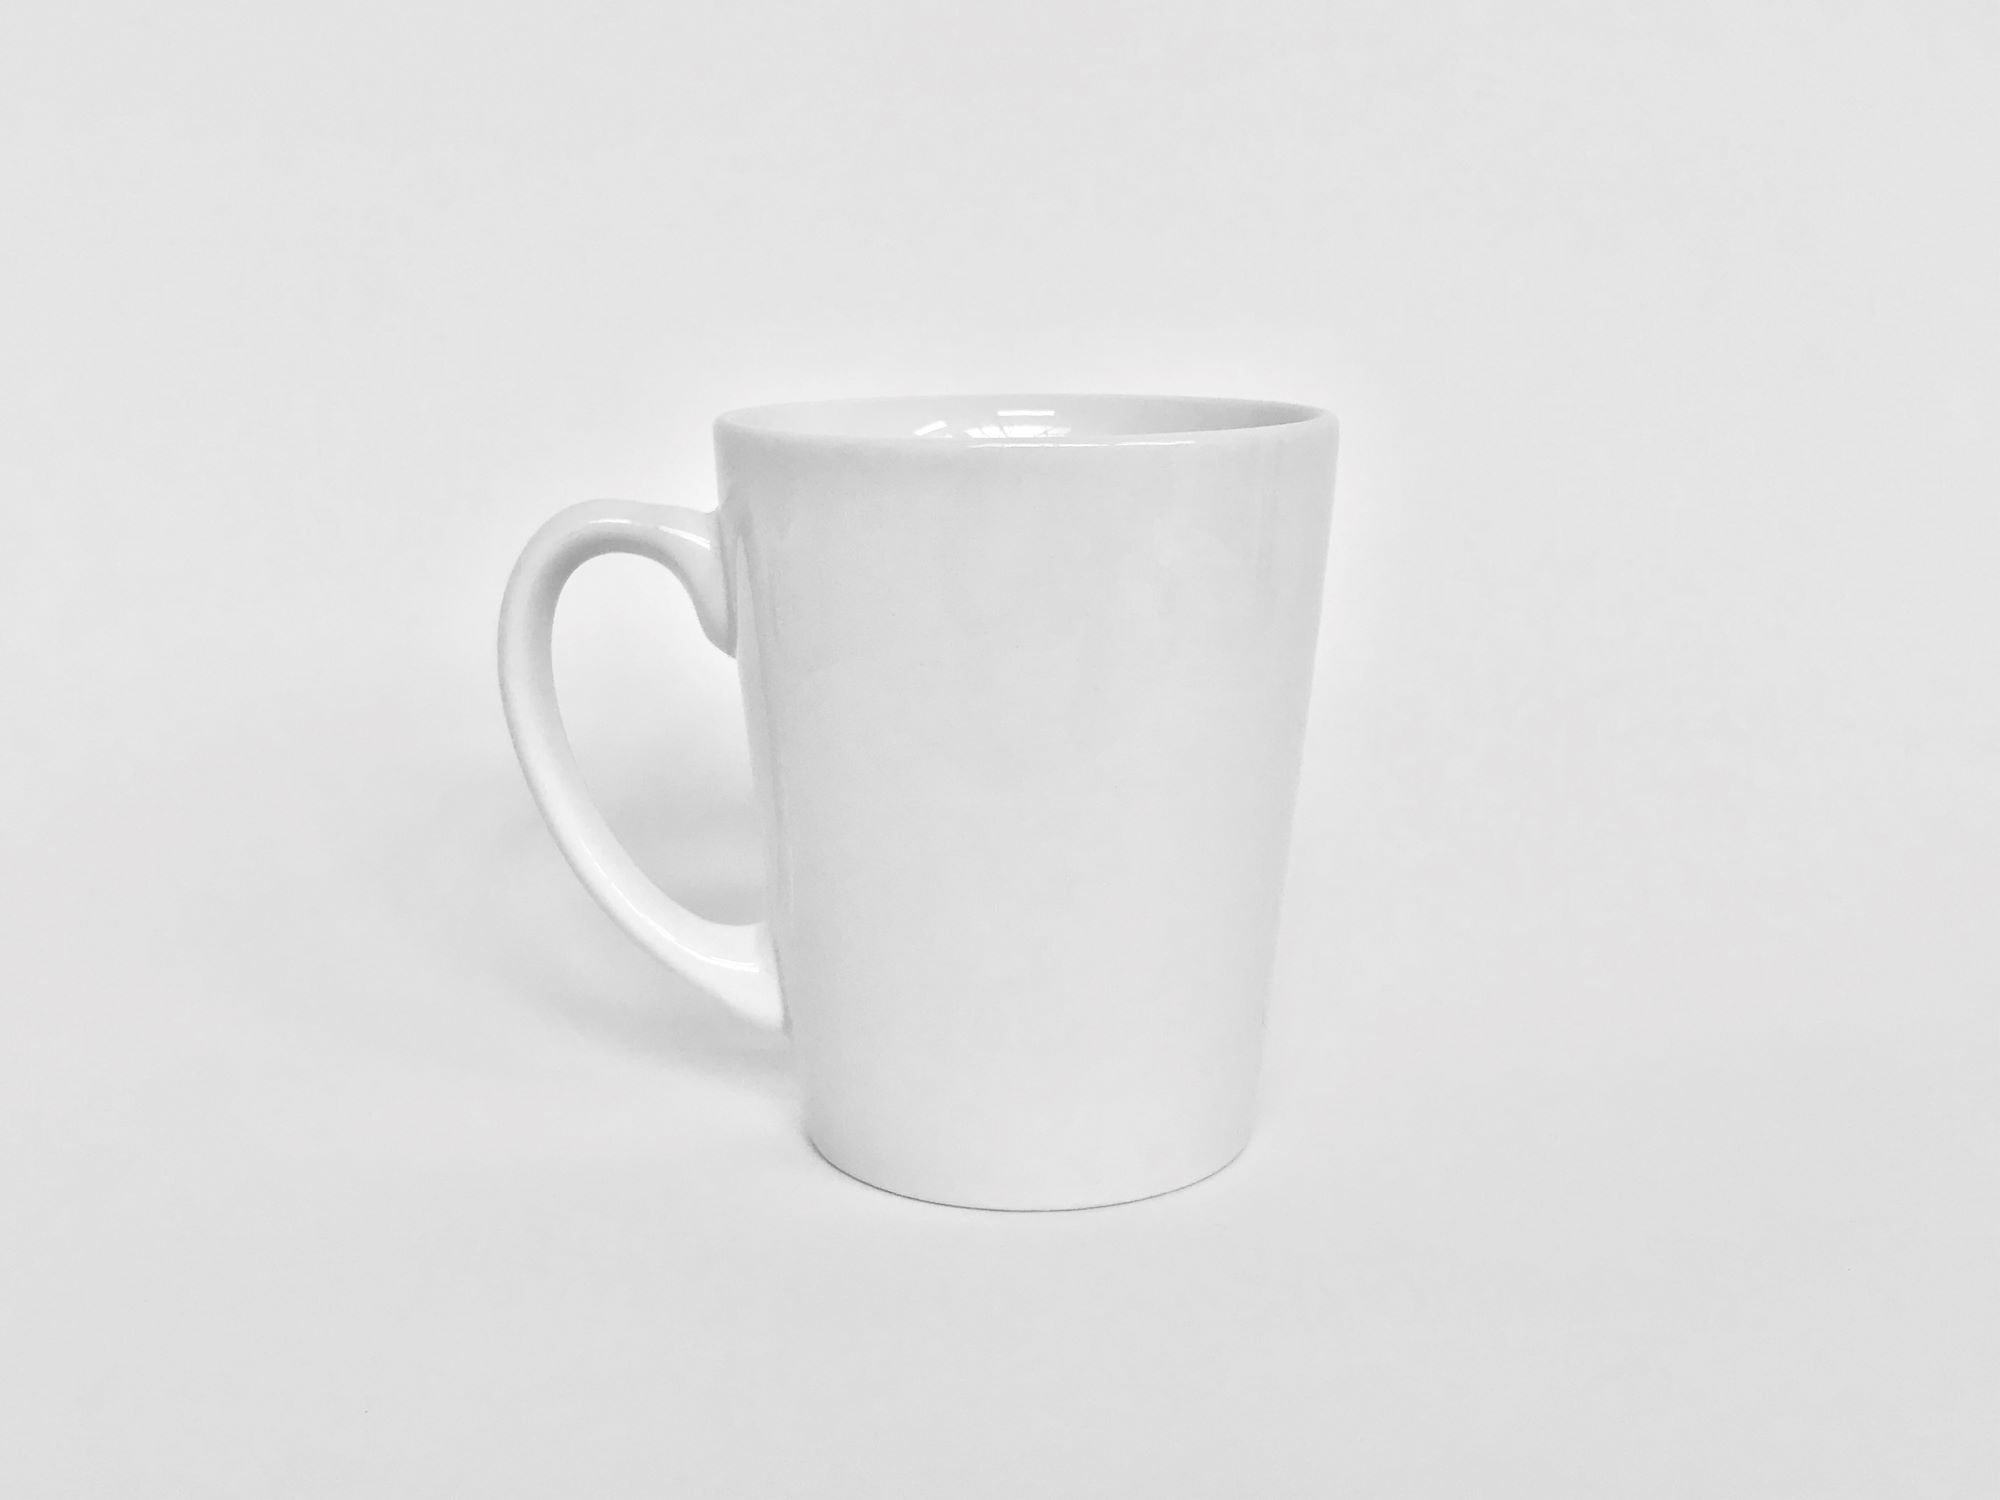 Coffee mug placed in front of a white background